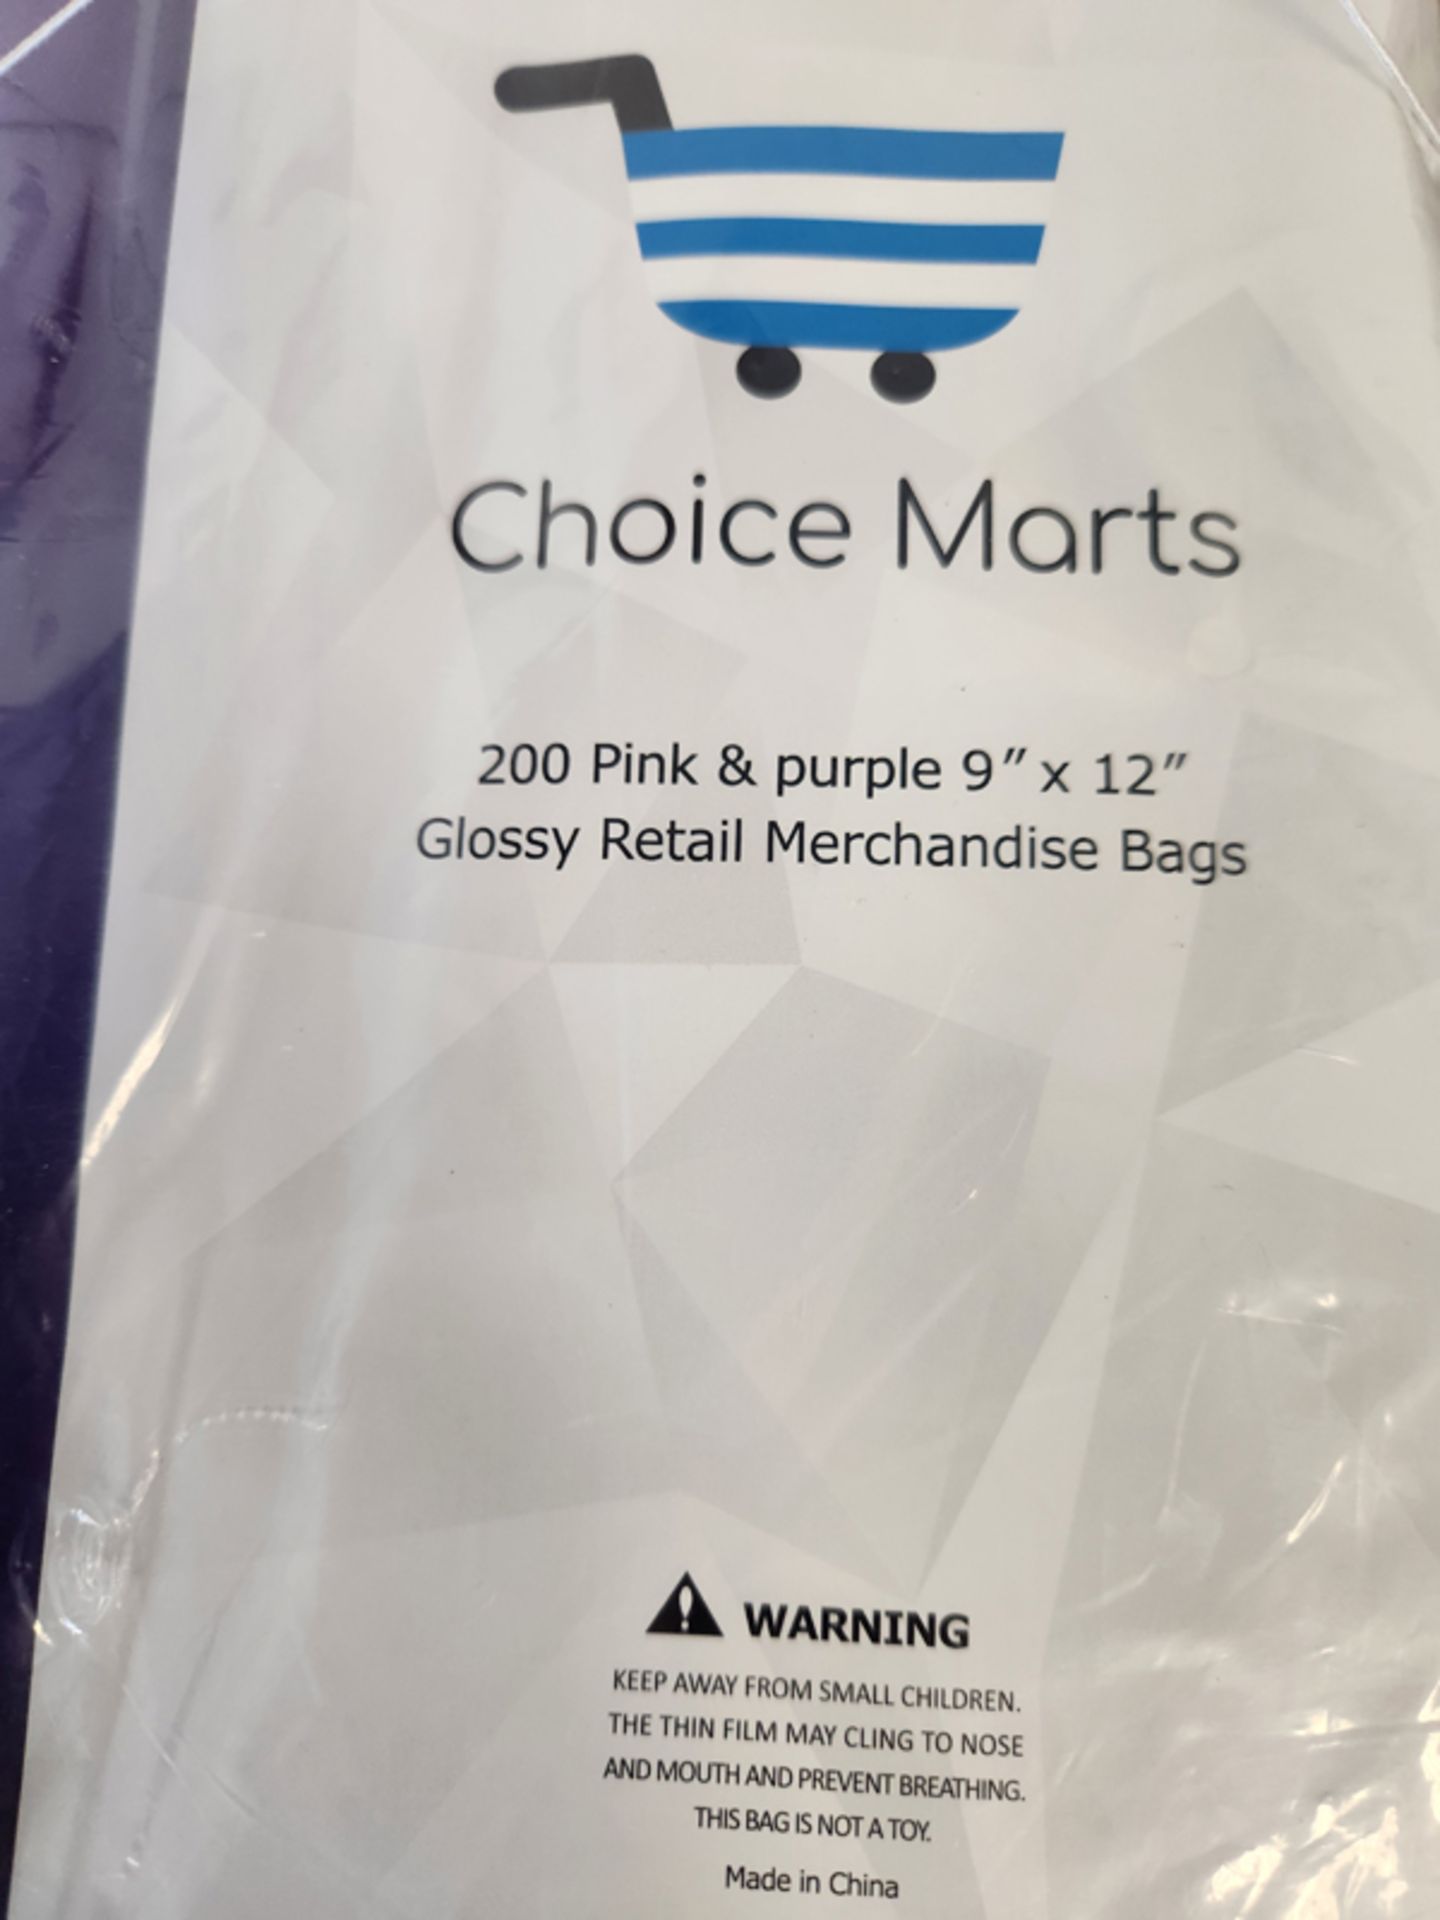 BAG OF 200 PINK AND PURPLE 9"X12" RETAIL MERCHANDISE BAGS - Image 2 of 3